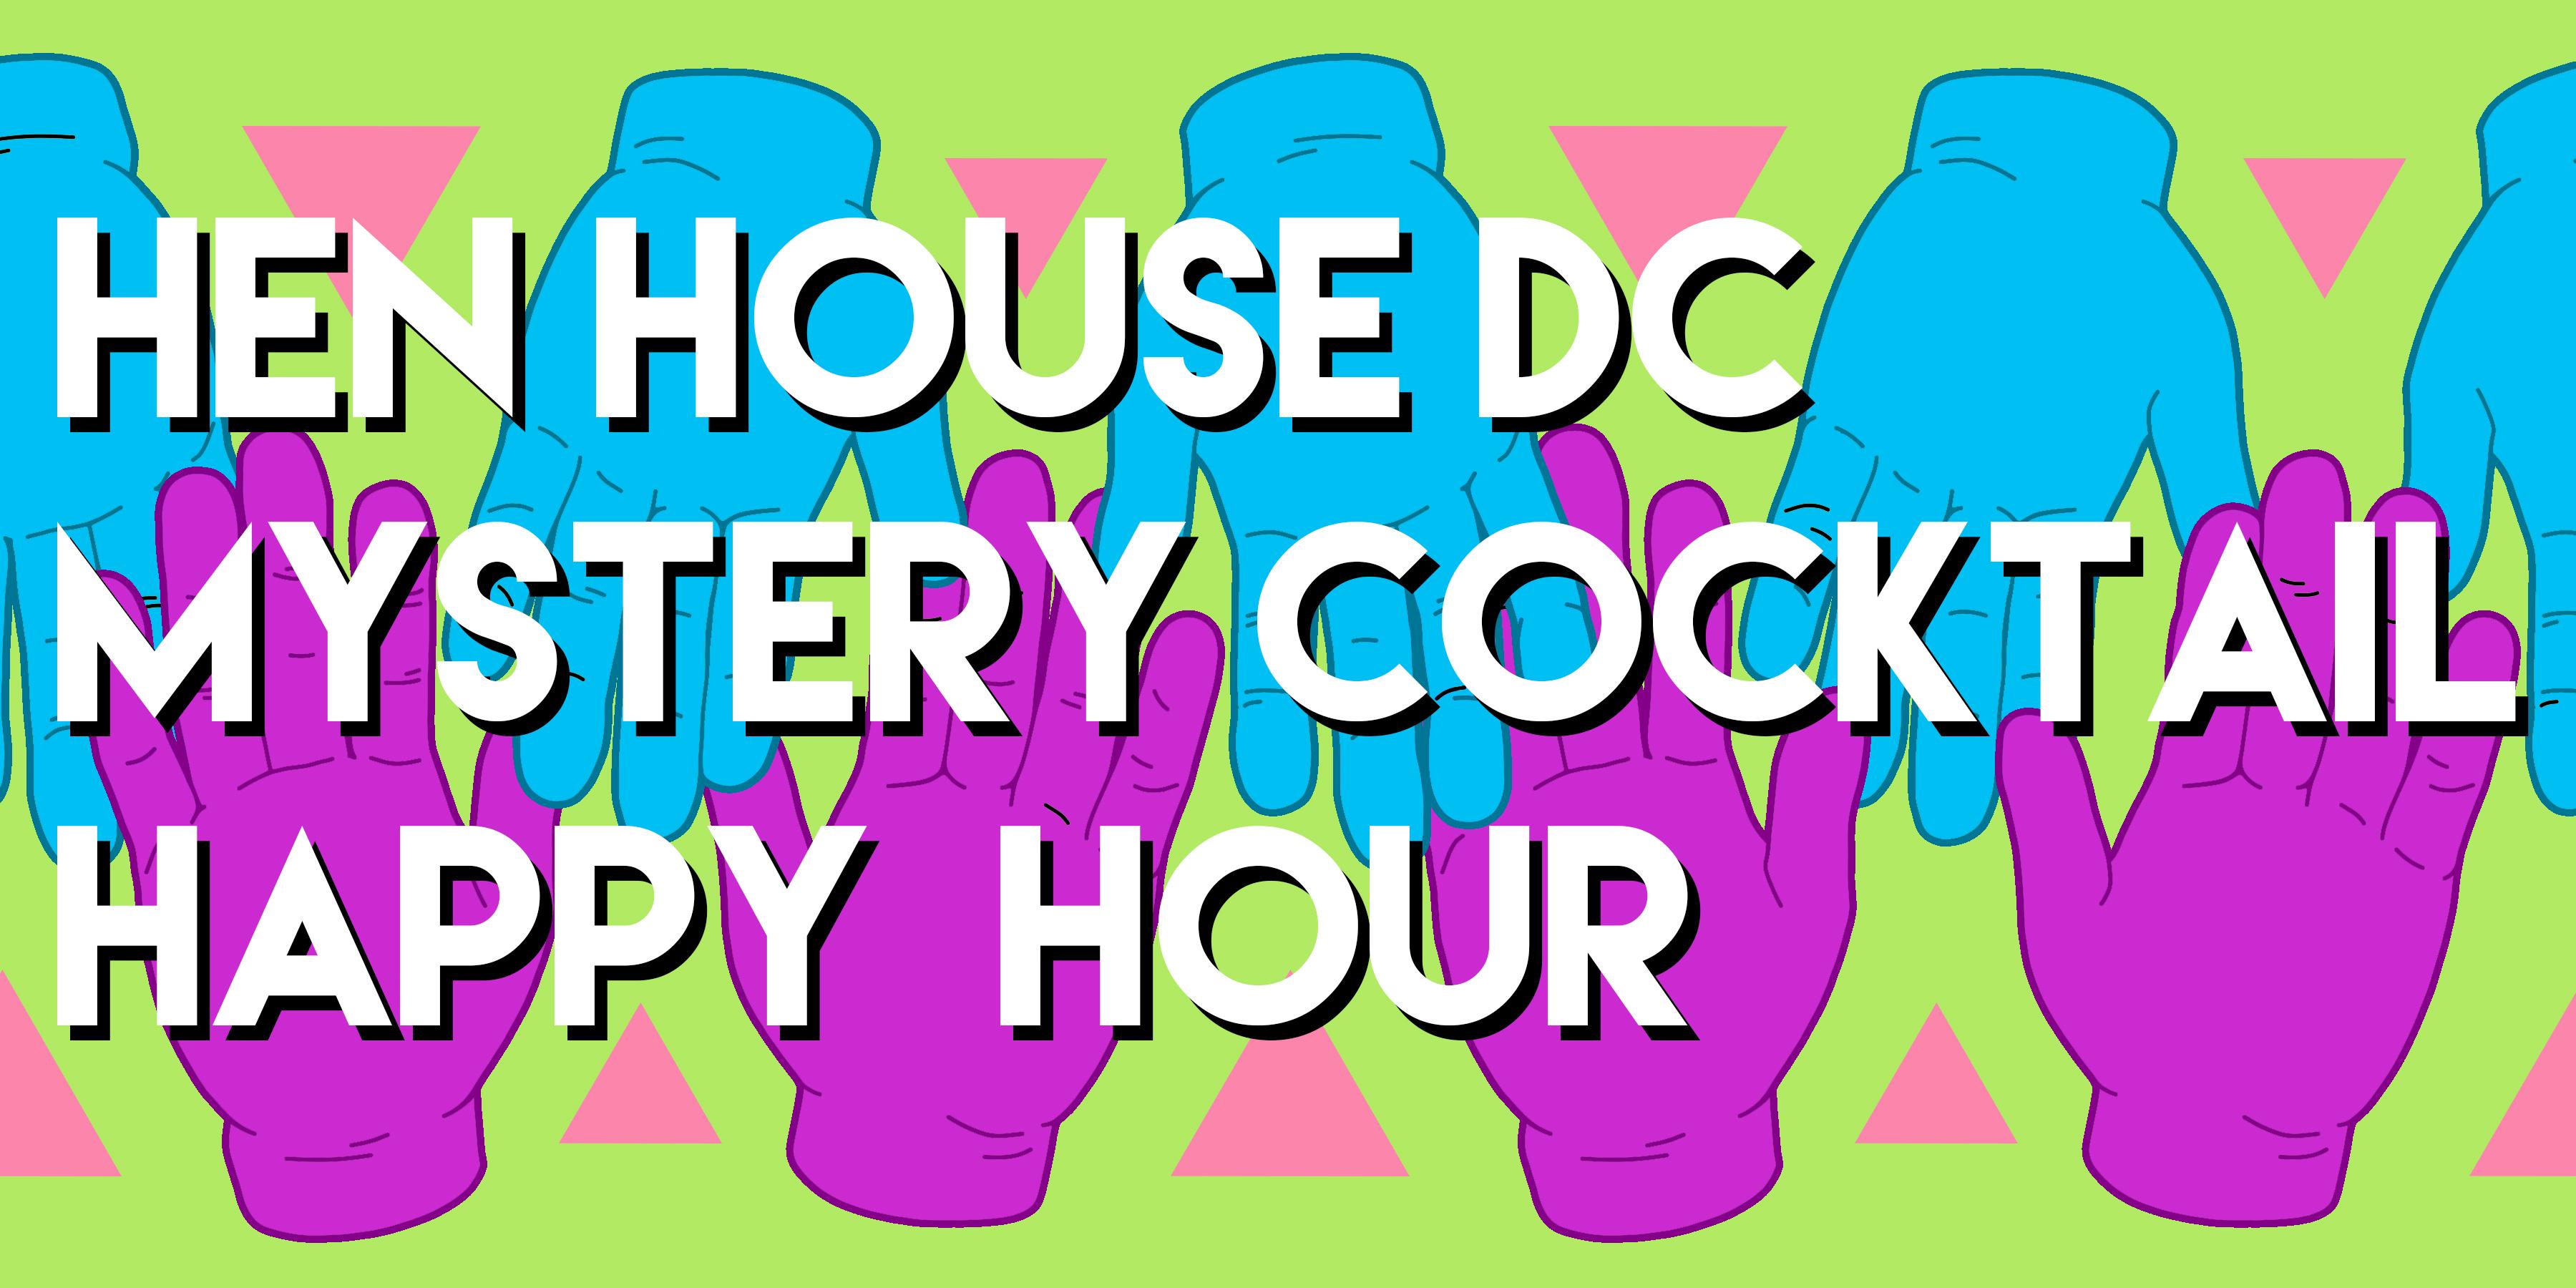 Hen House DC Mystery Cocktail Happy Hour